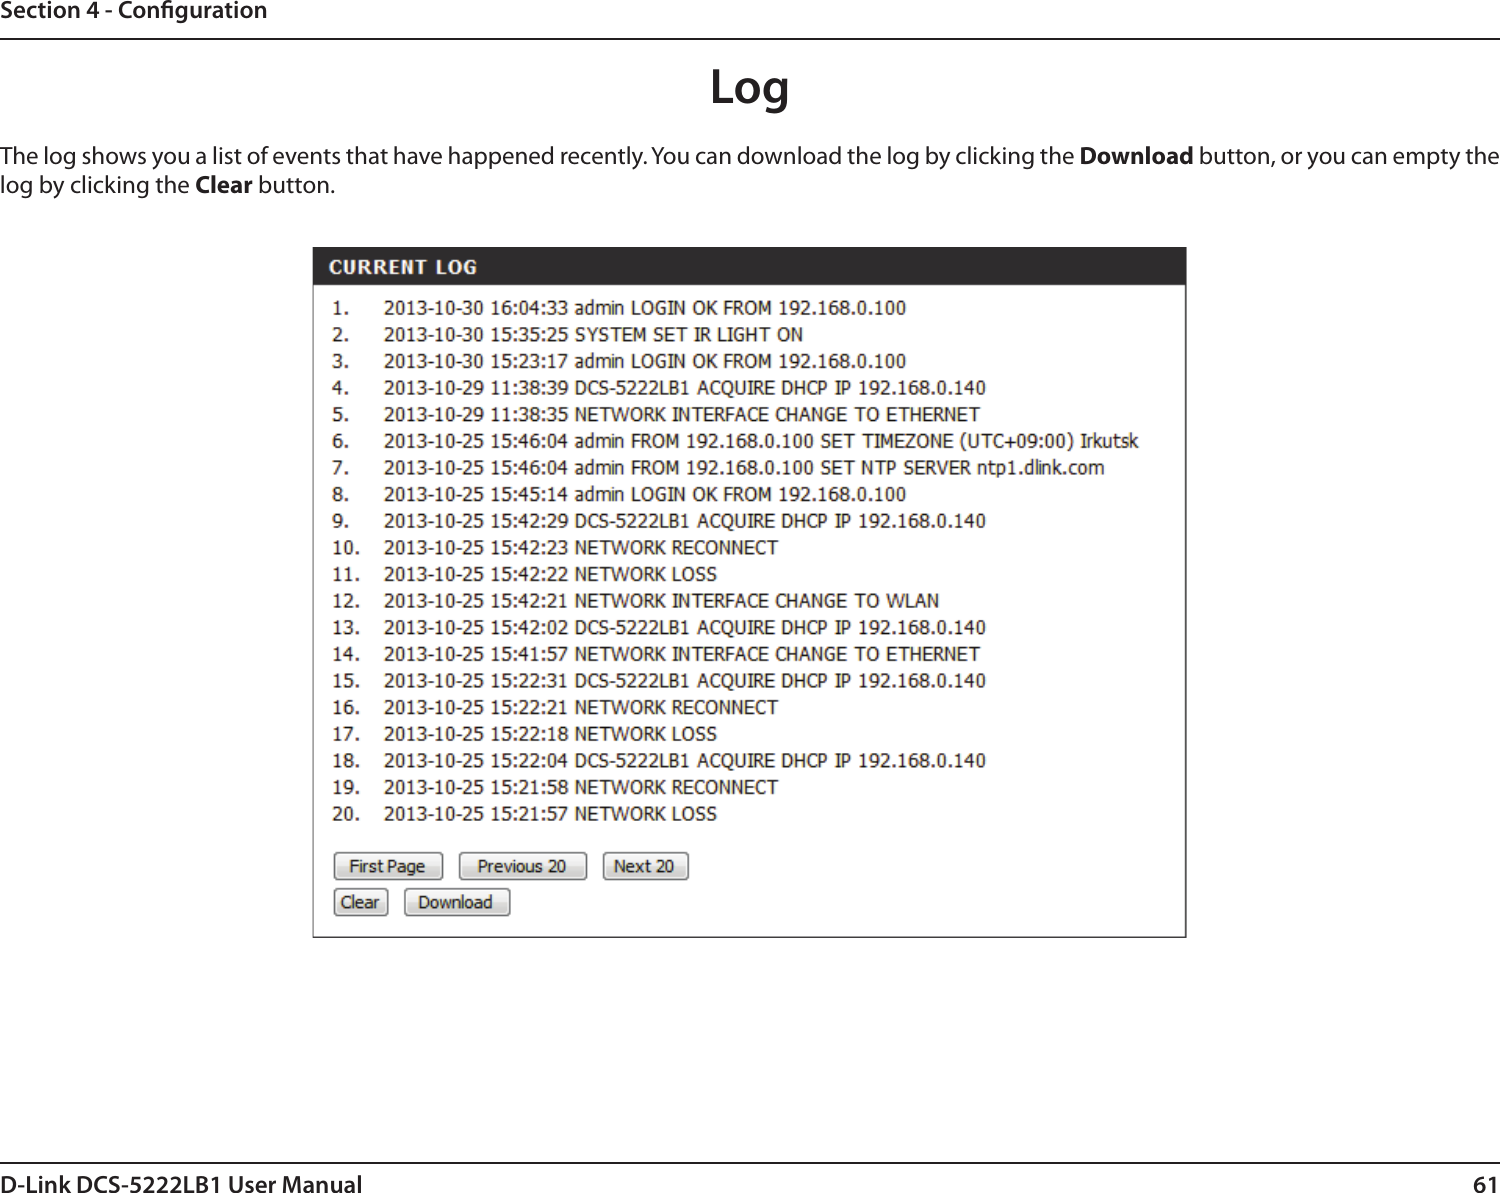 61D-Link DCS-5222LB1 User ManualSection 4 - CongurationThe log shows you a list of events that have happened recently. You can download the log by clicking the Download button, or you can empty the log by clicking the Clear button.Log